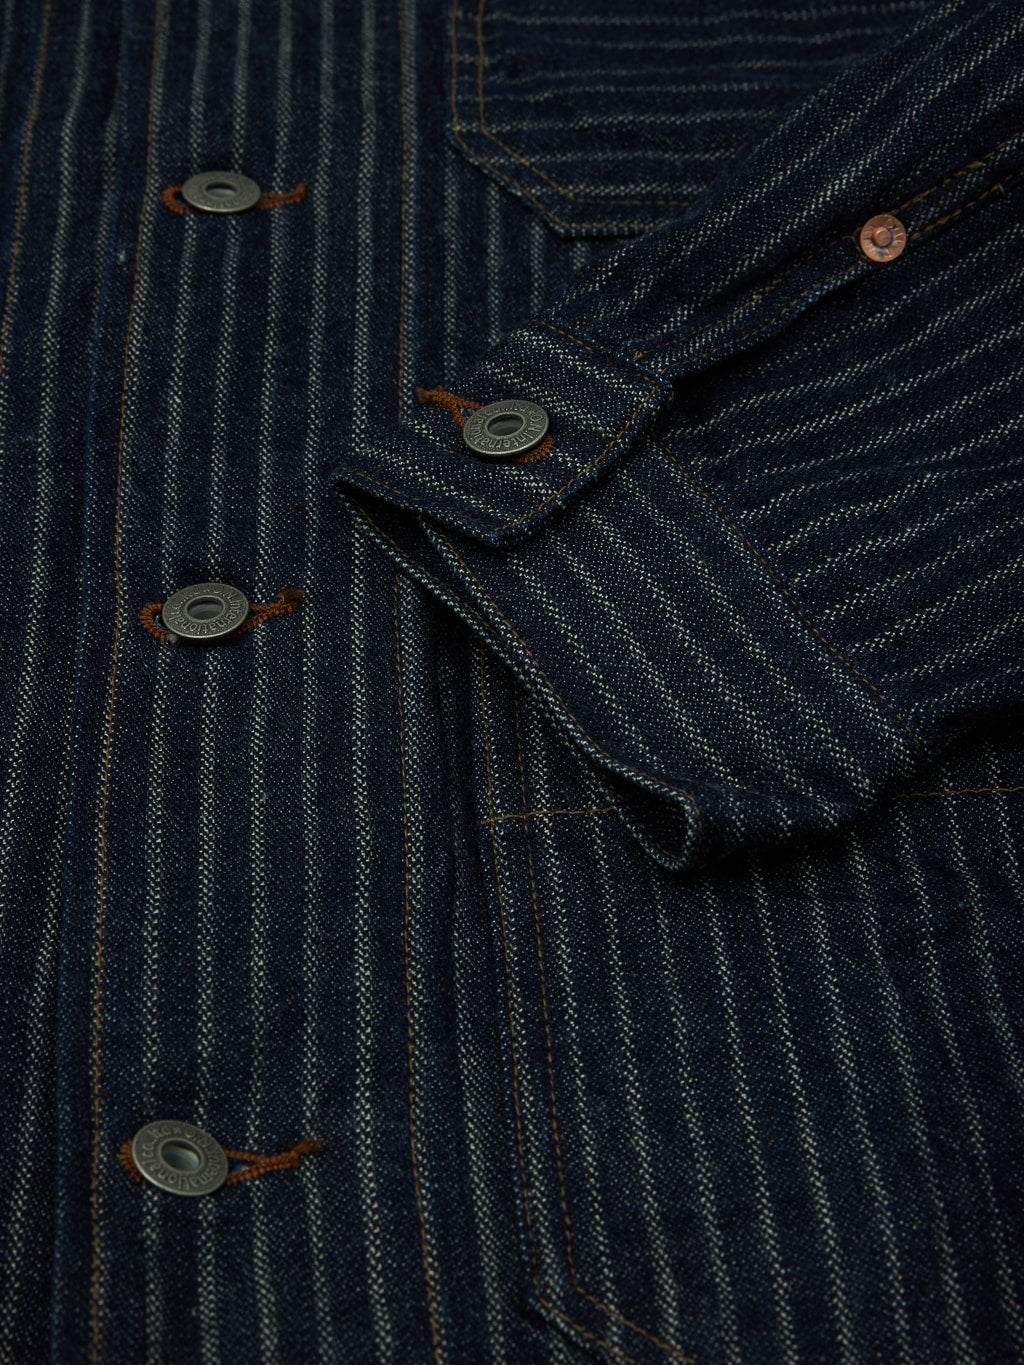 ONI Denim HJS Drop Needle Stitching Jacquard Striped Coverall copper buttons